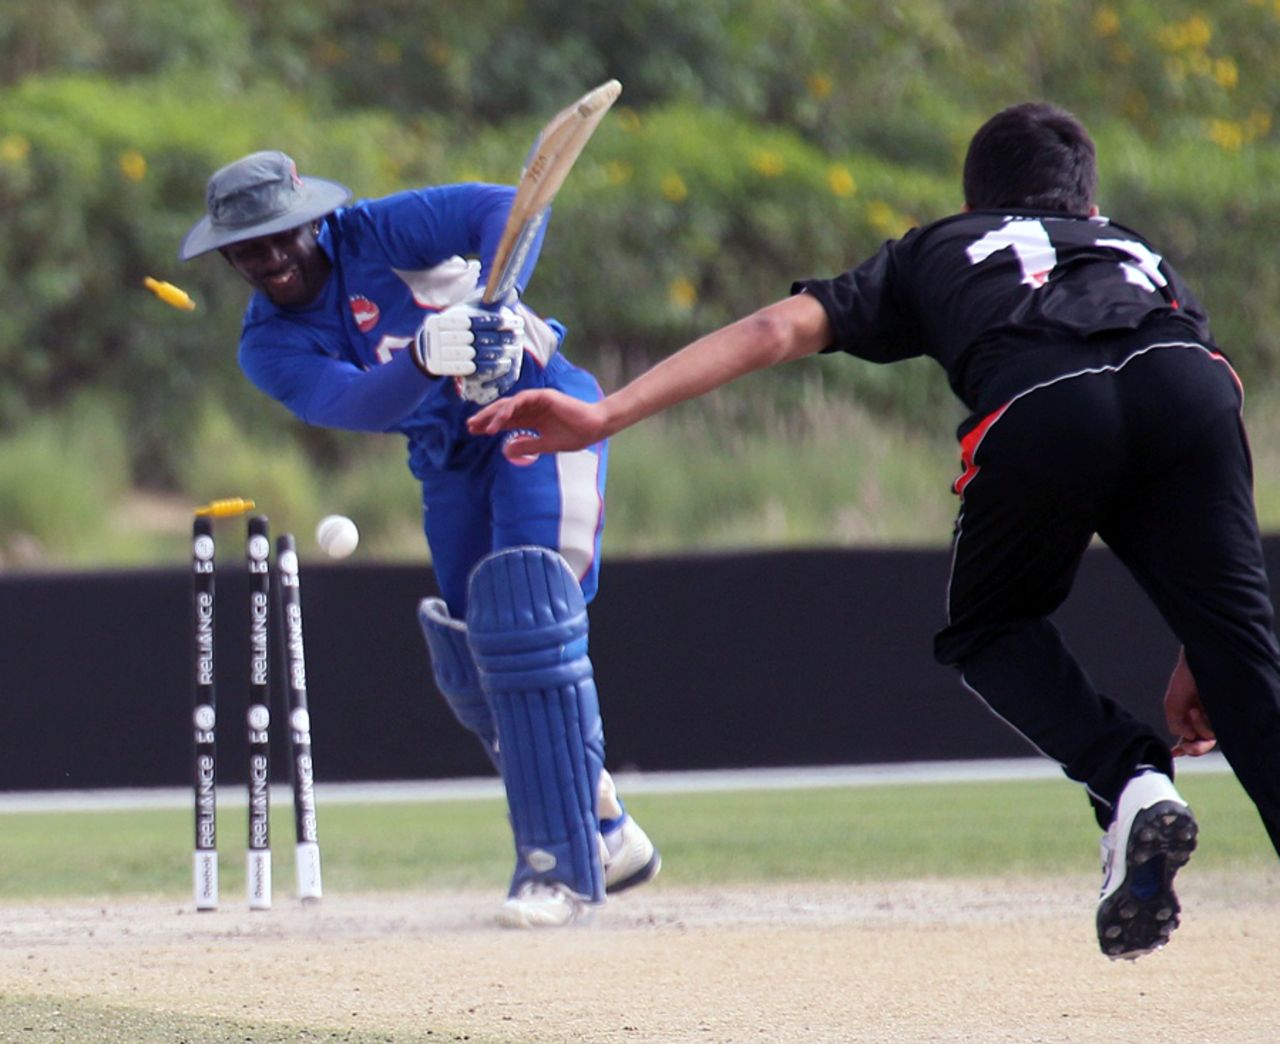 Orlano Baker is clean bowled by Aizaz Khan during the ICC World Twenty20 Qualifier 11th Place Play-off match between USA and Hong Kong played at the ICC Global Cricket Academy ground in Dubai on 23rd March 2012